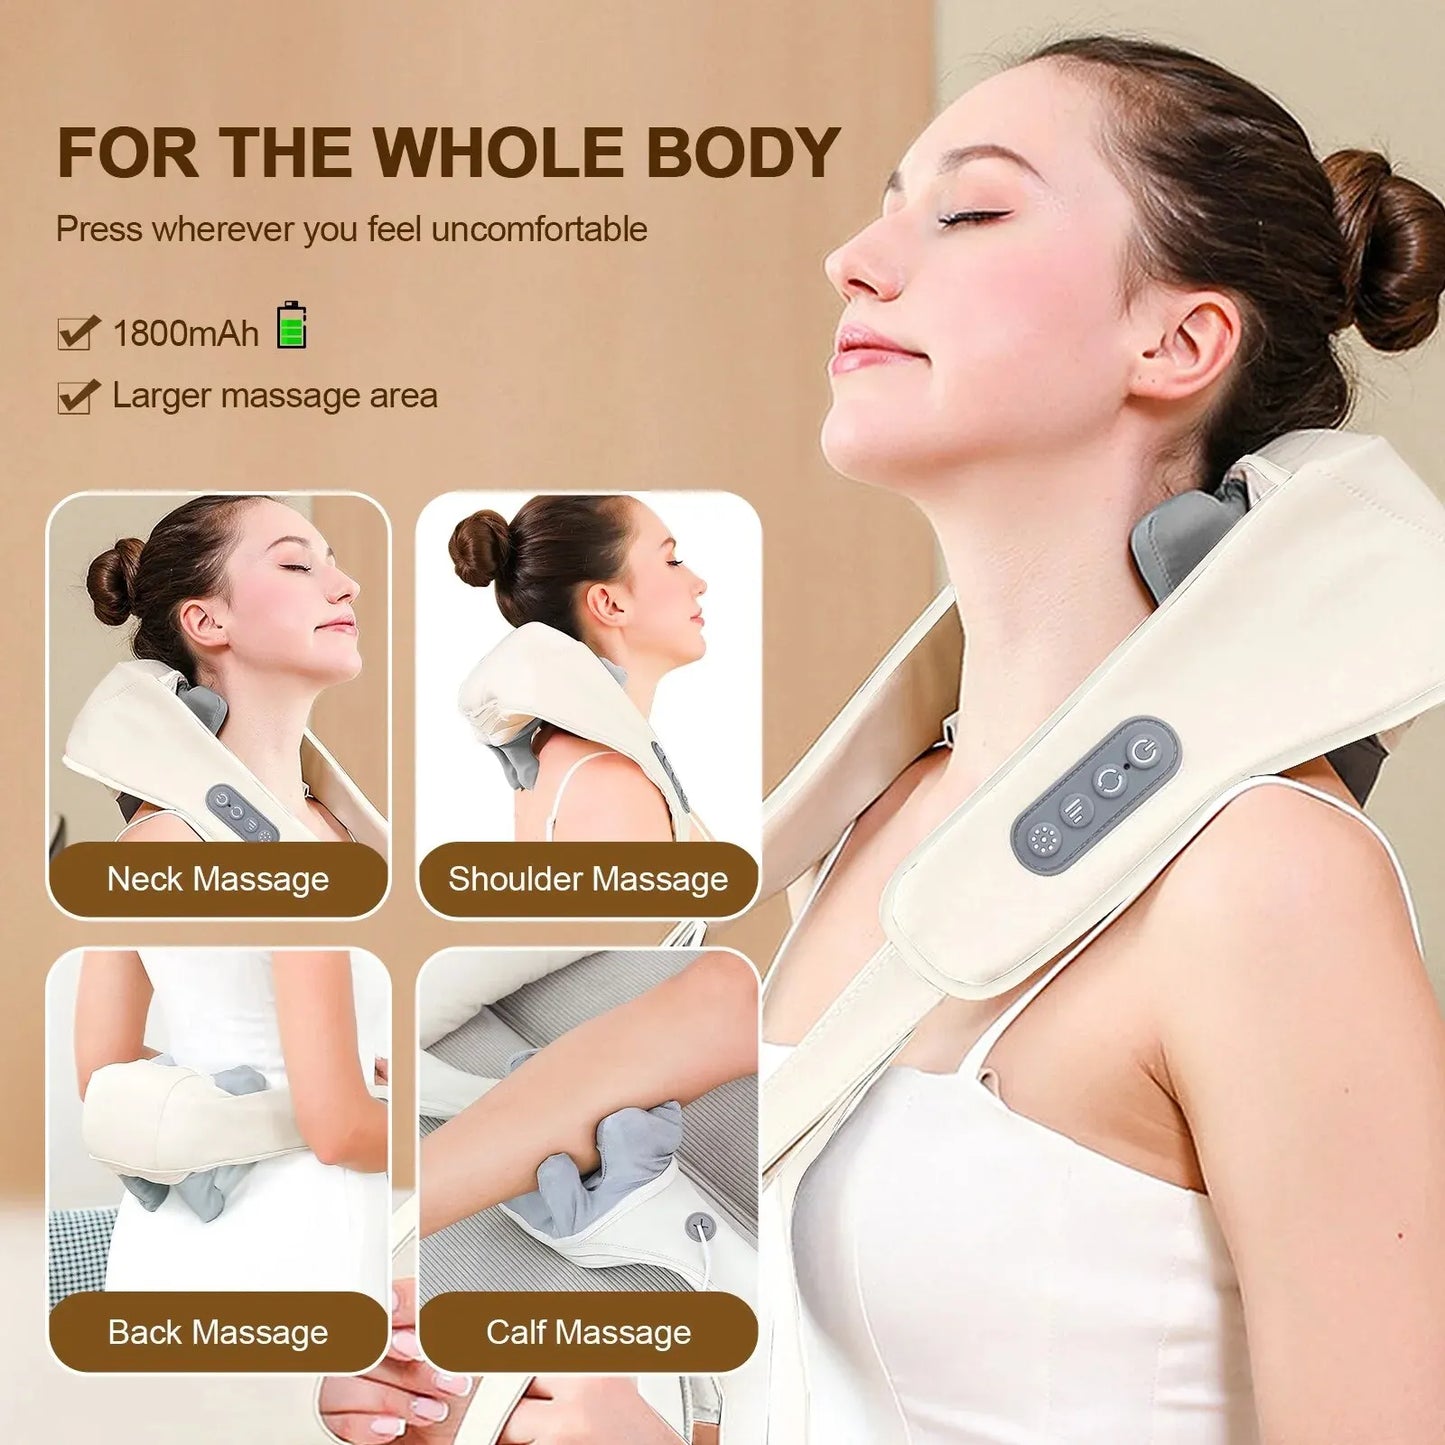 The innovative solution for muscle pain